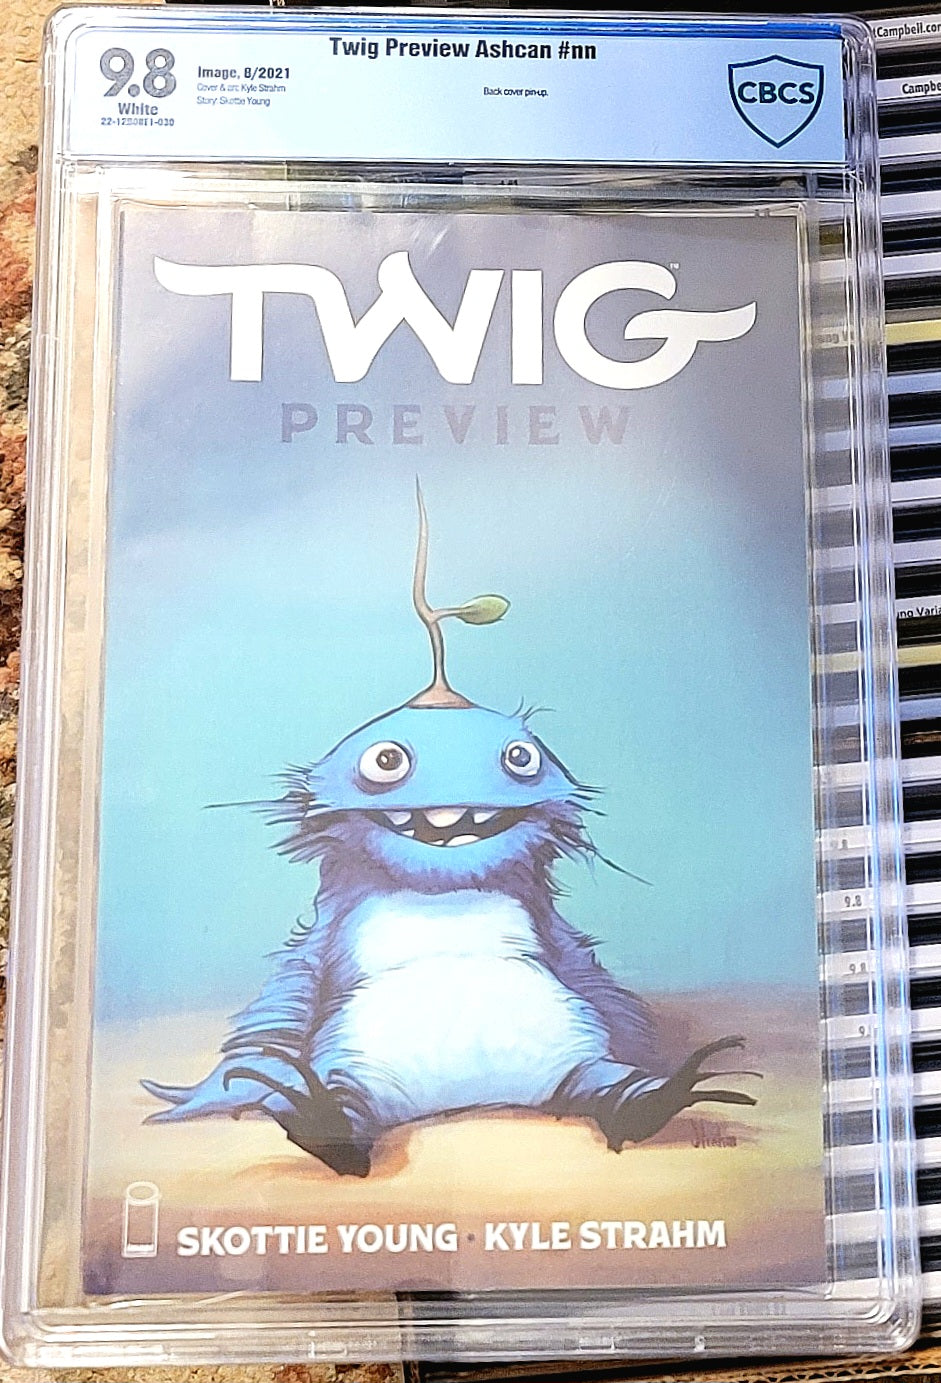 Twig Preview Ashcan #nn CBCS 9.8 (Back Cover Pin-Up)